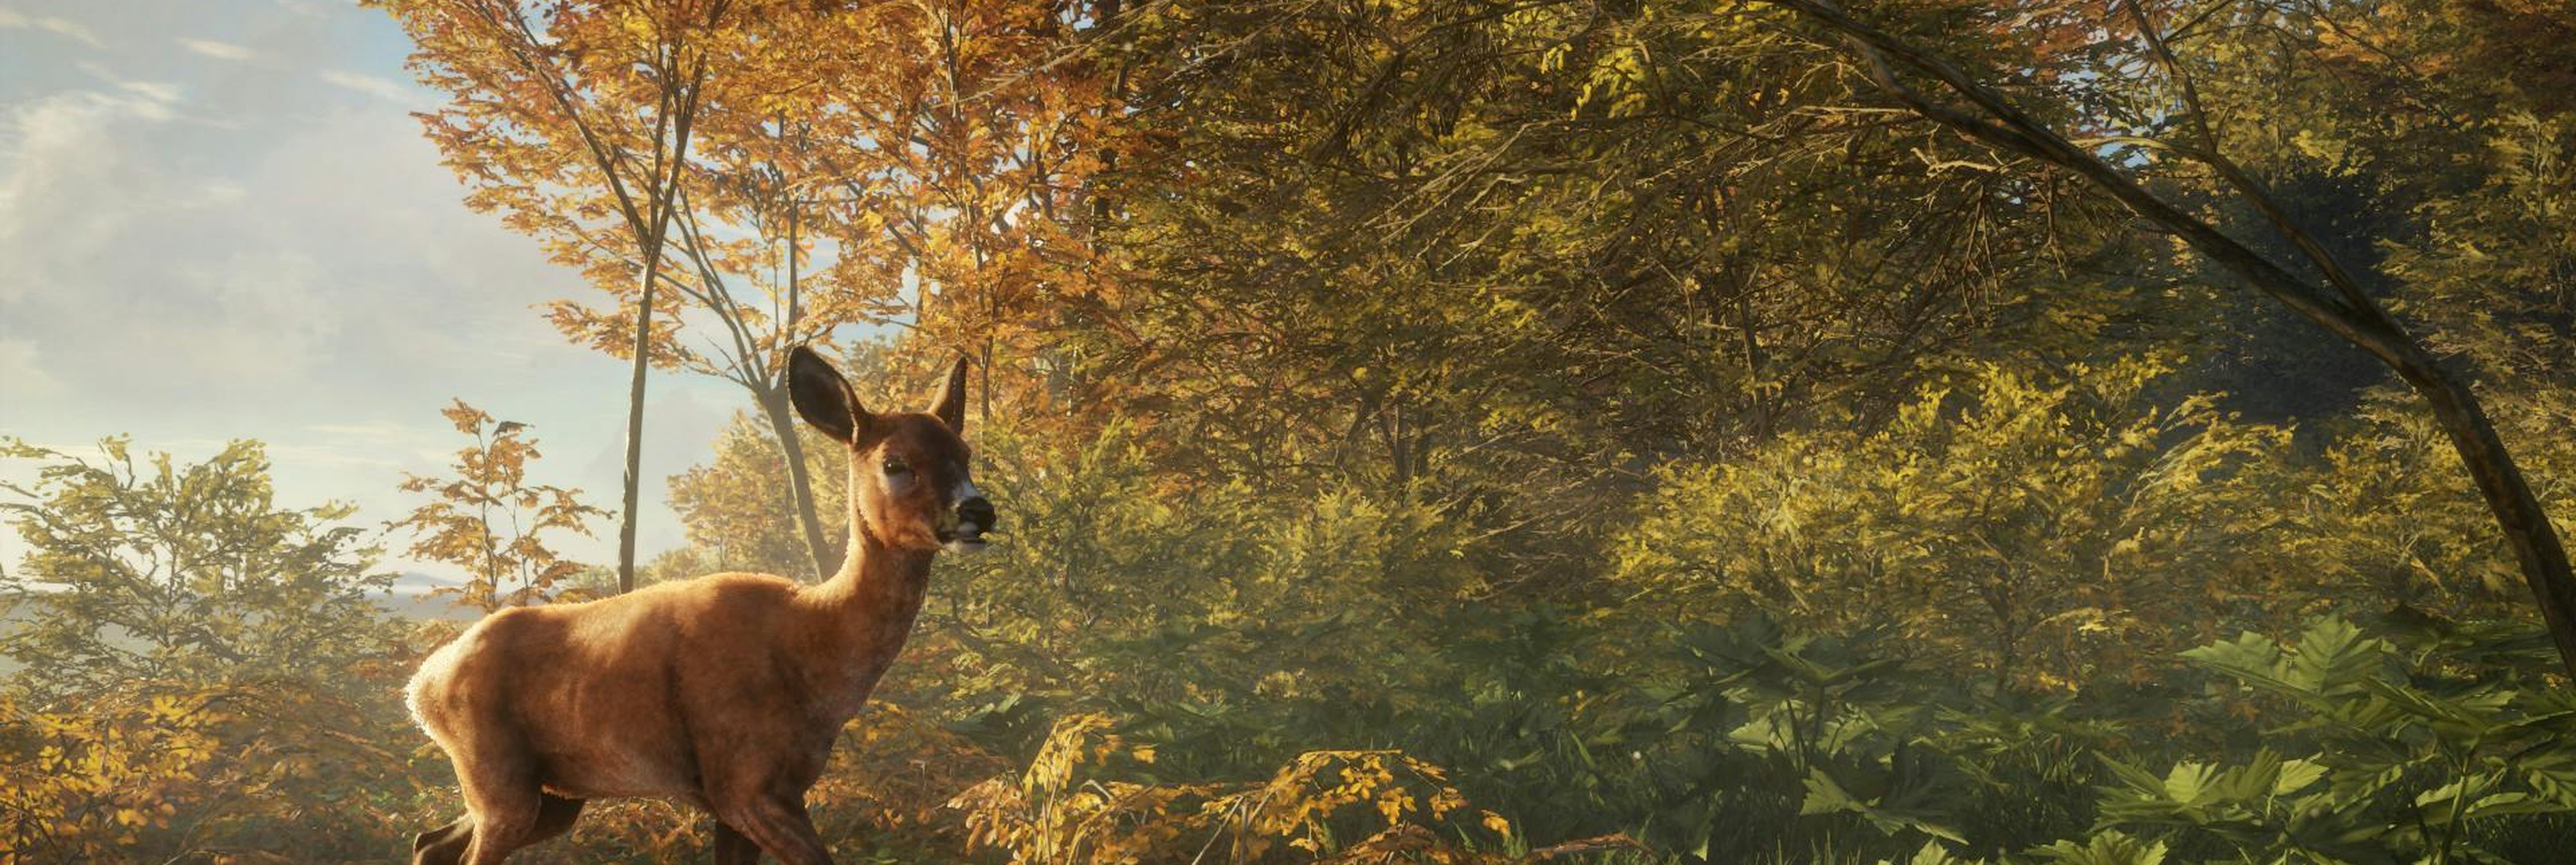 theHunter: Call of the Wild is Available Now! - Avalanche Studios